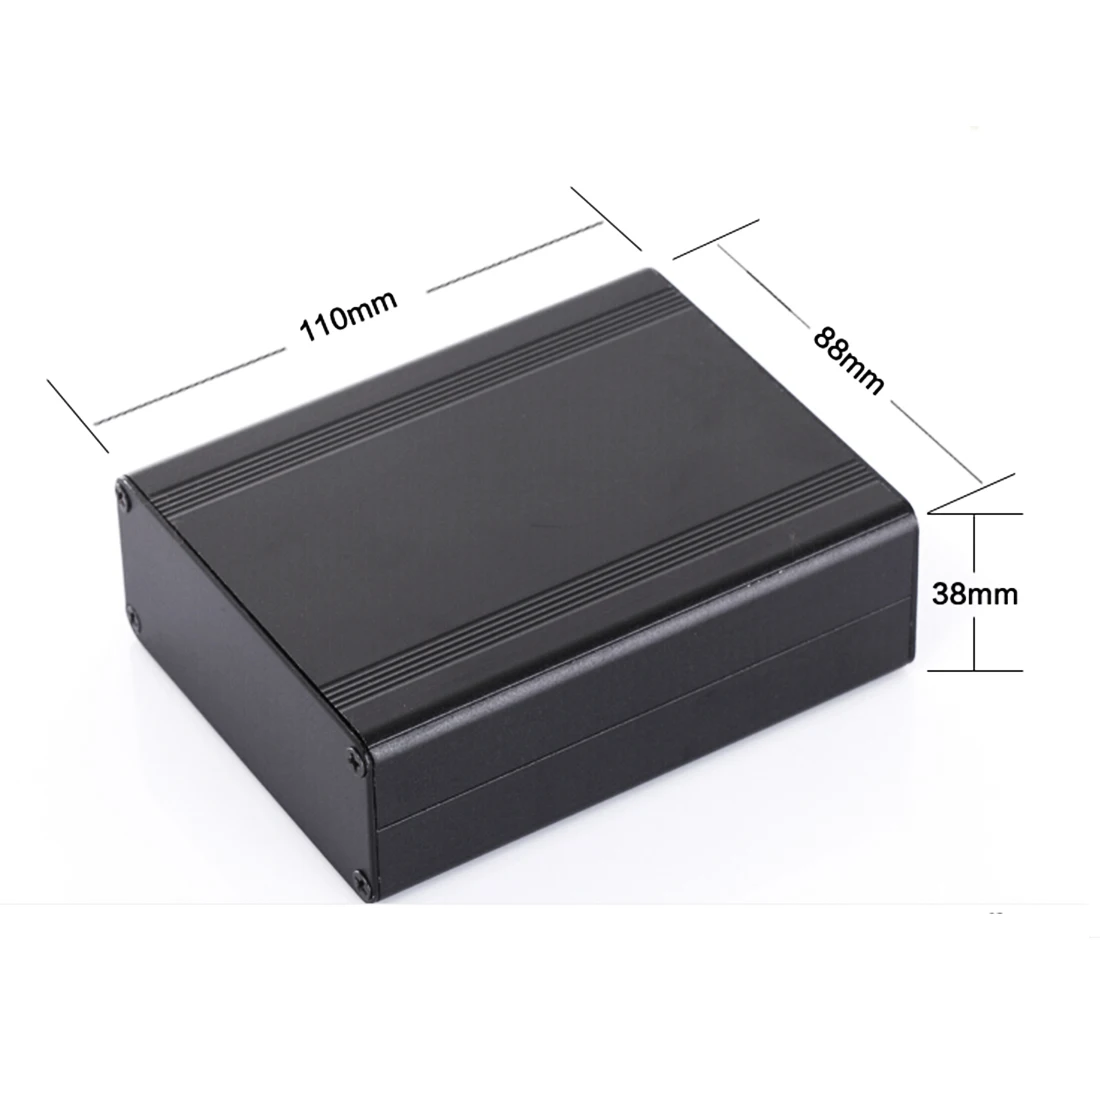 Aluminum Enclosure Electric Project Case PCB Shell Box 88X38X110mm DIY gaowen preamplifier chassis sound amplifier case diy enclosure hifi shell box 430 95 340mm